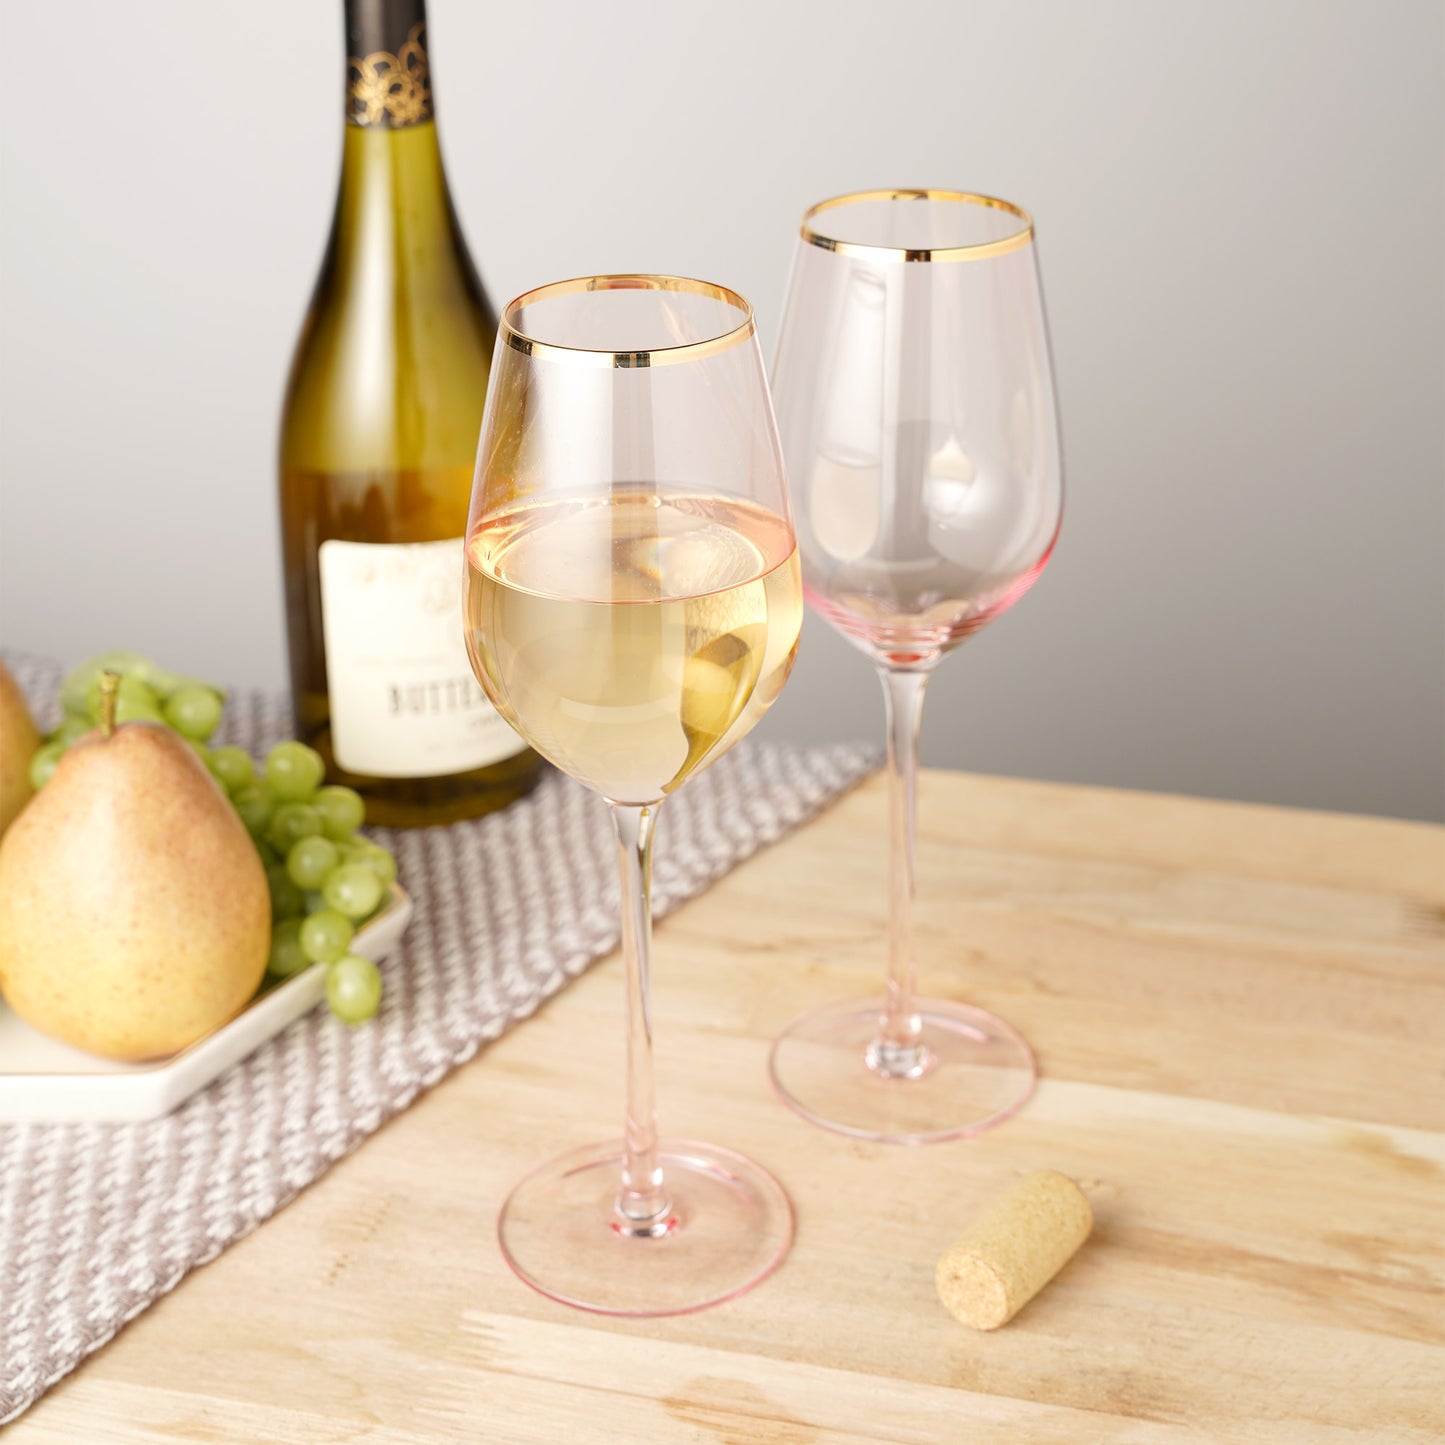 Rose 14 oz. Crystal White Wine Glass Set of 4 by TwineÂ®